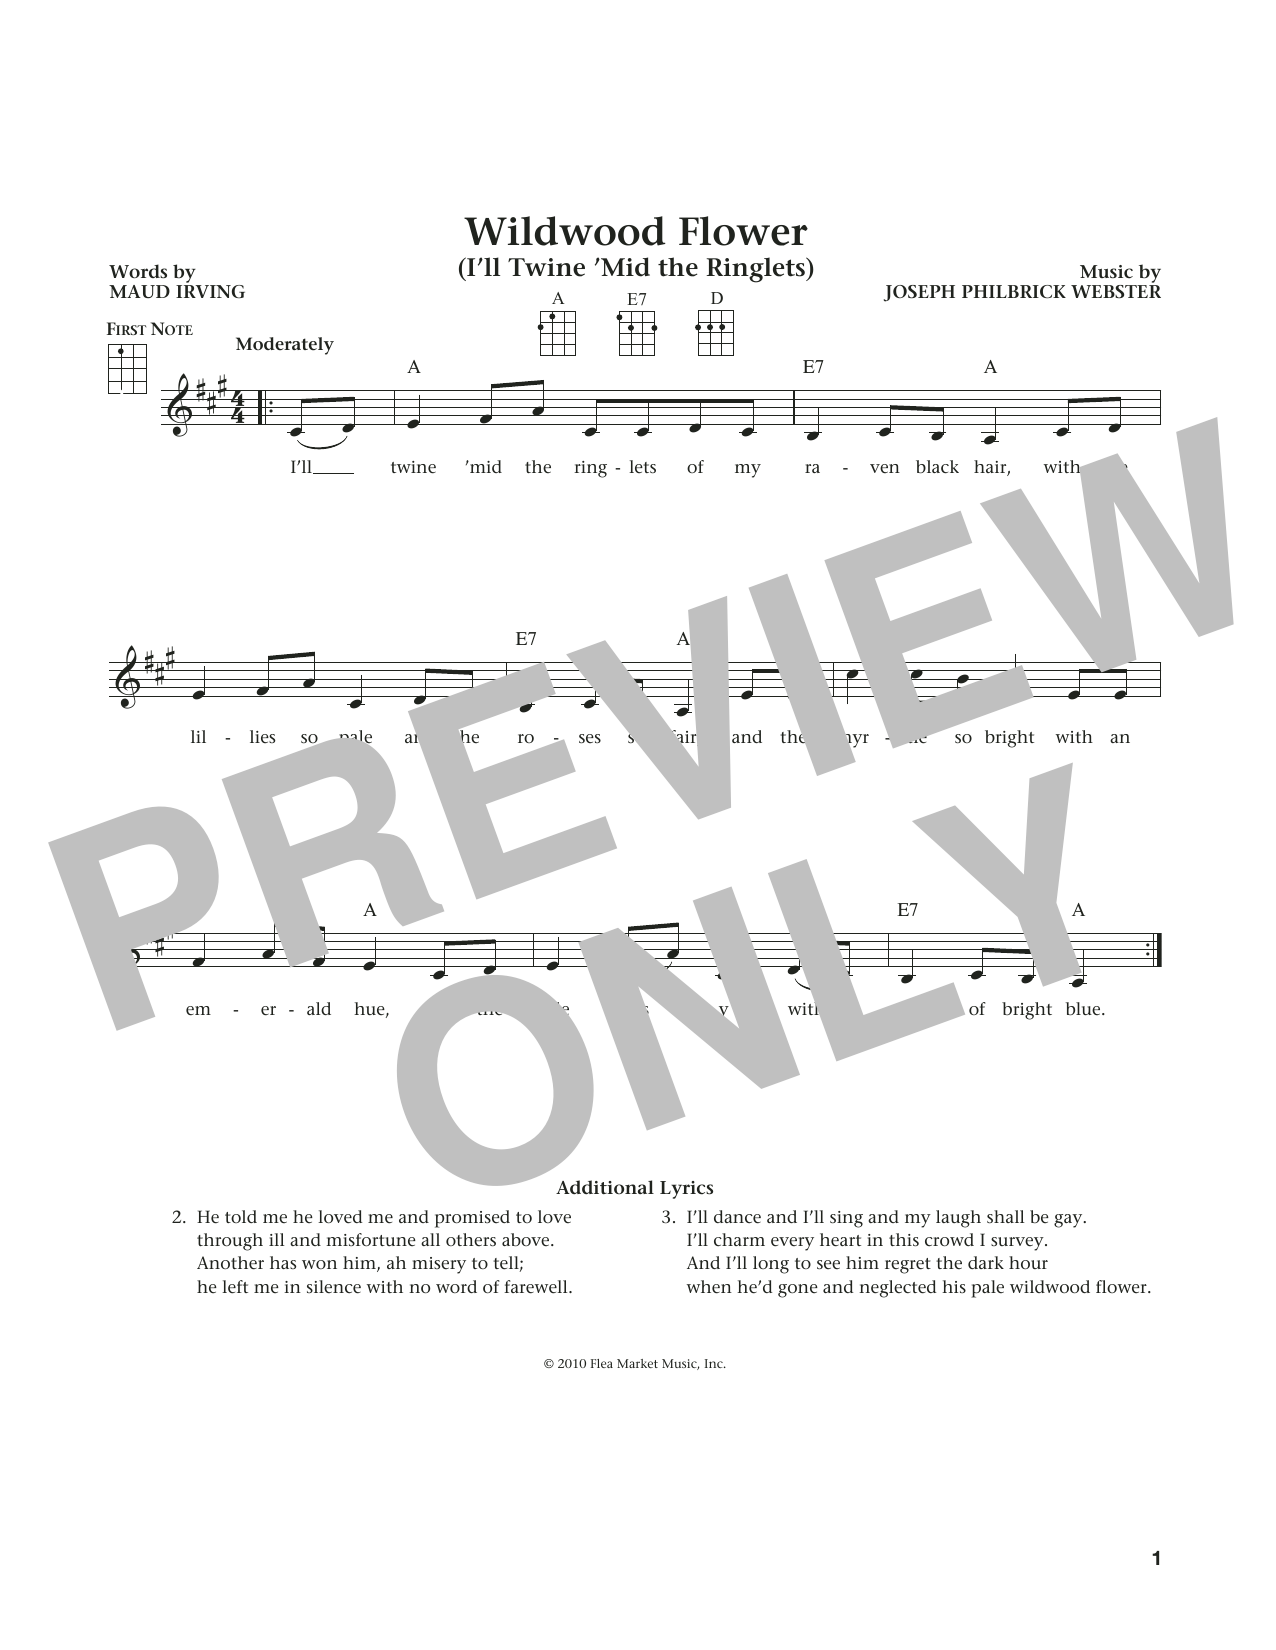 Download Traditional Wildwood Flower (from The Daily Ukulele Sheet Music